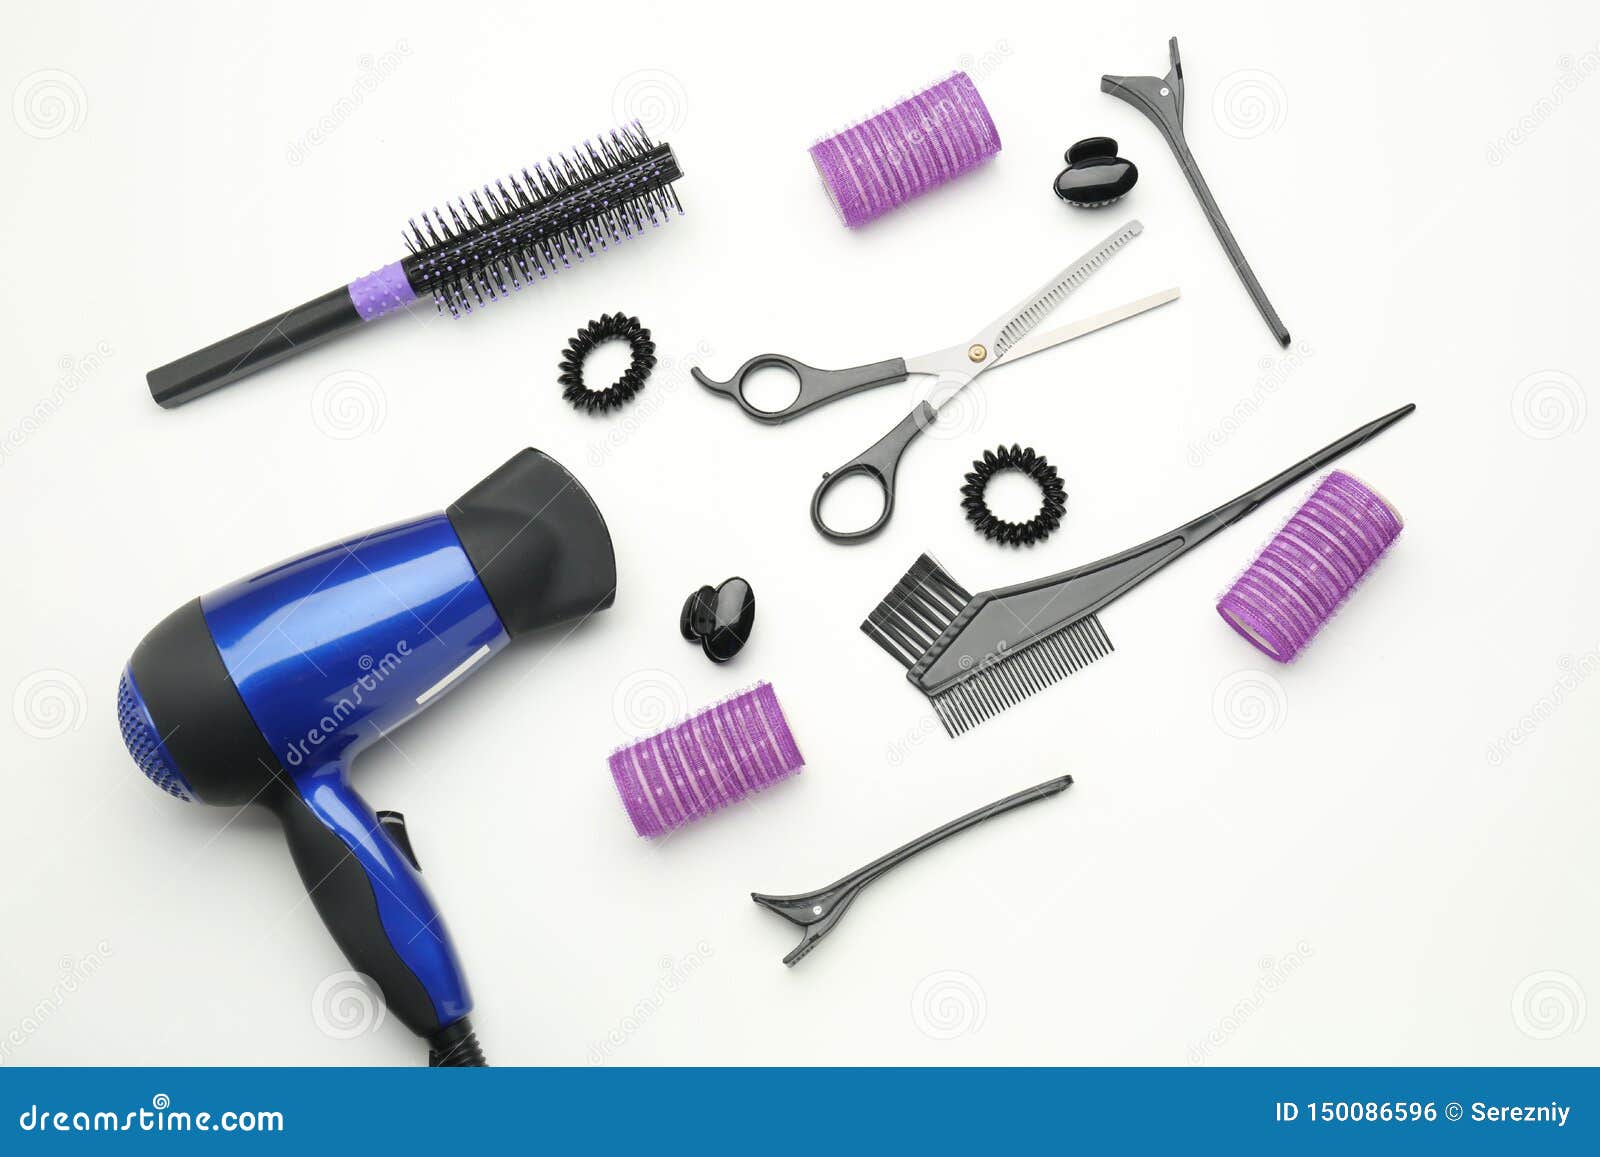 Professional Hairdresser S Supplies On White Background Stock